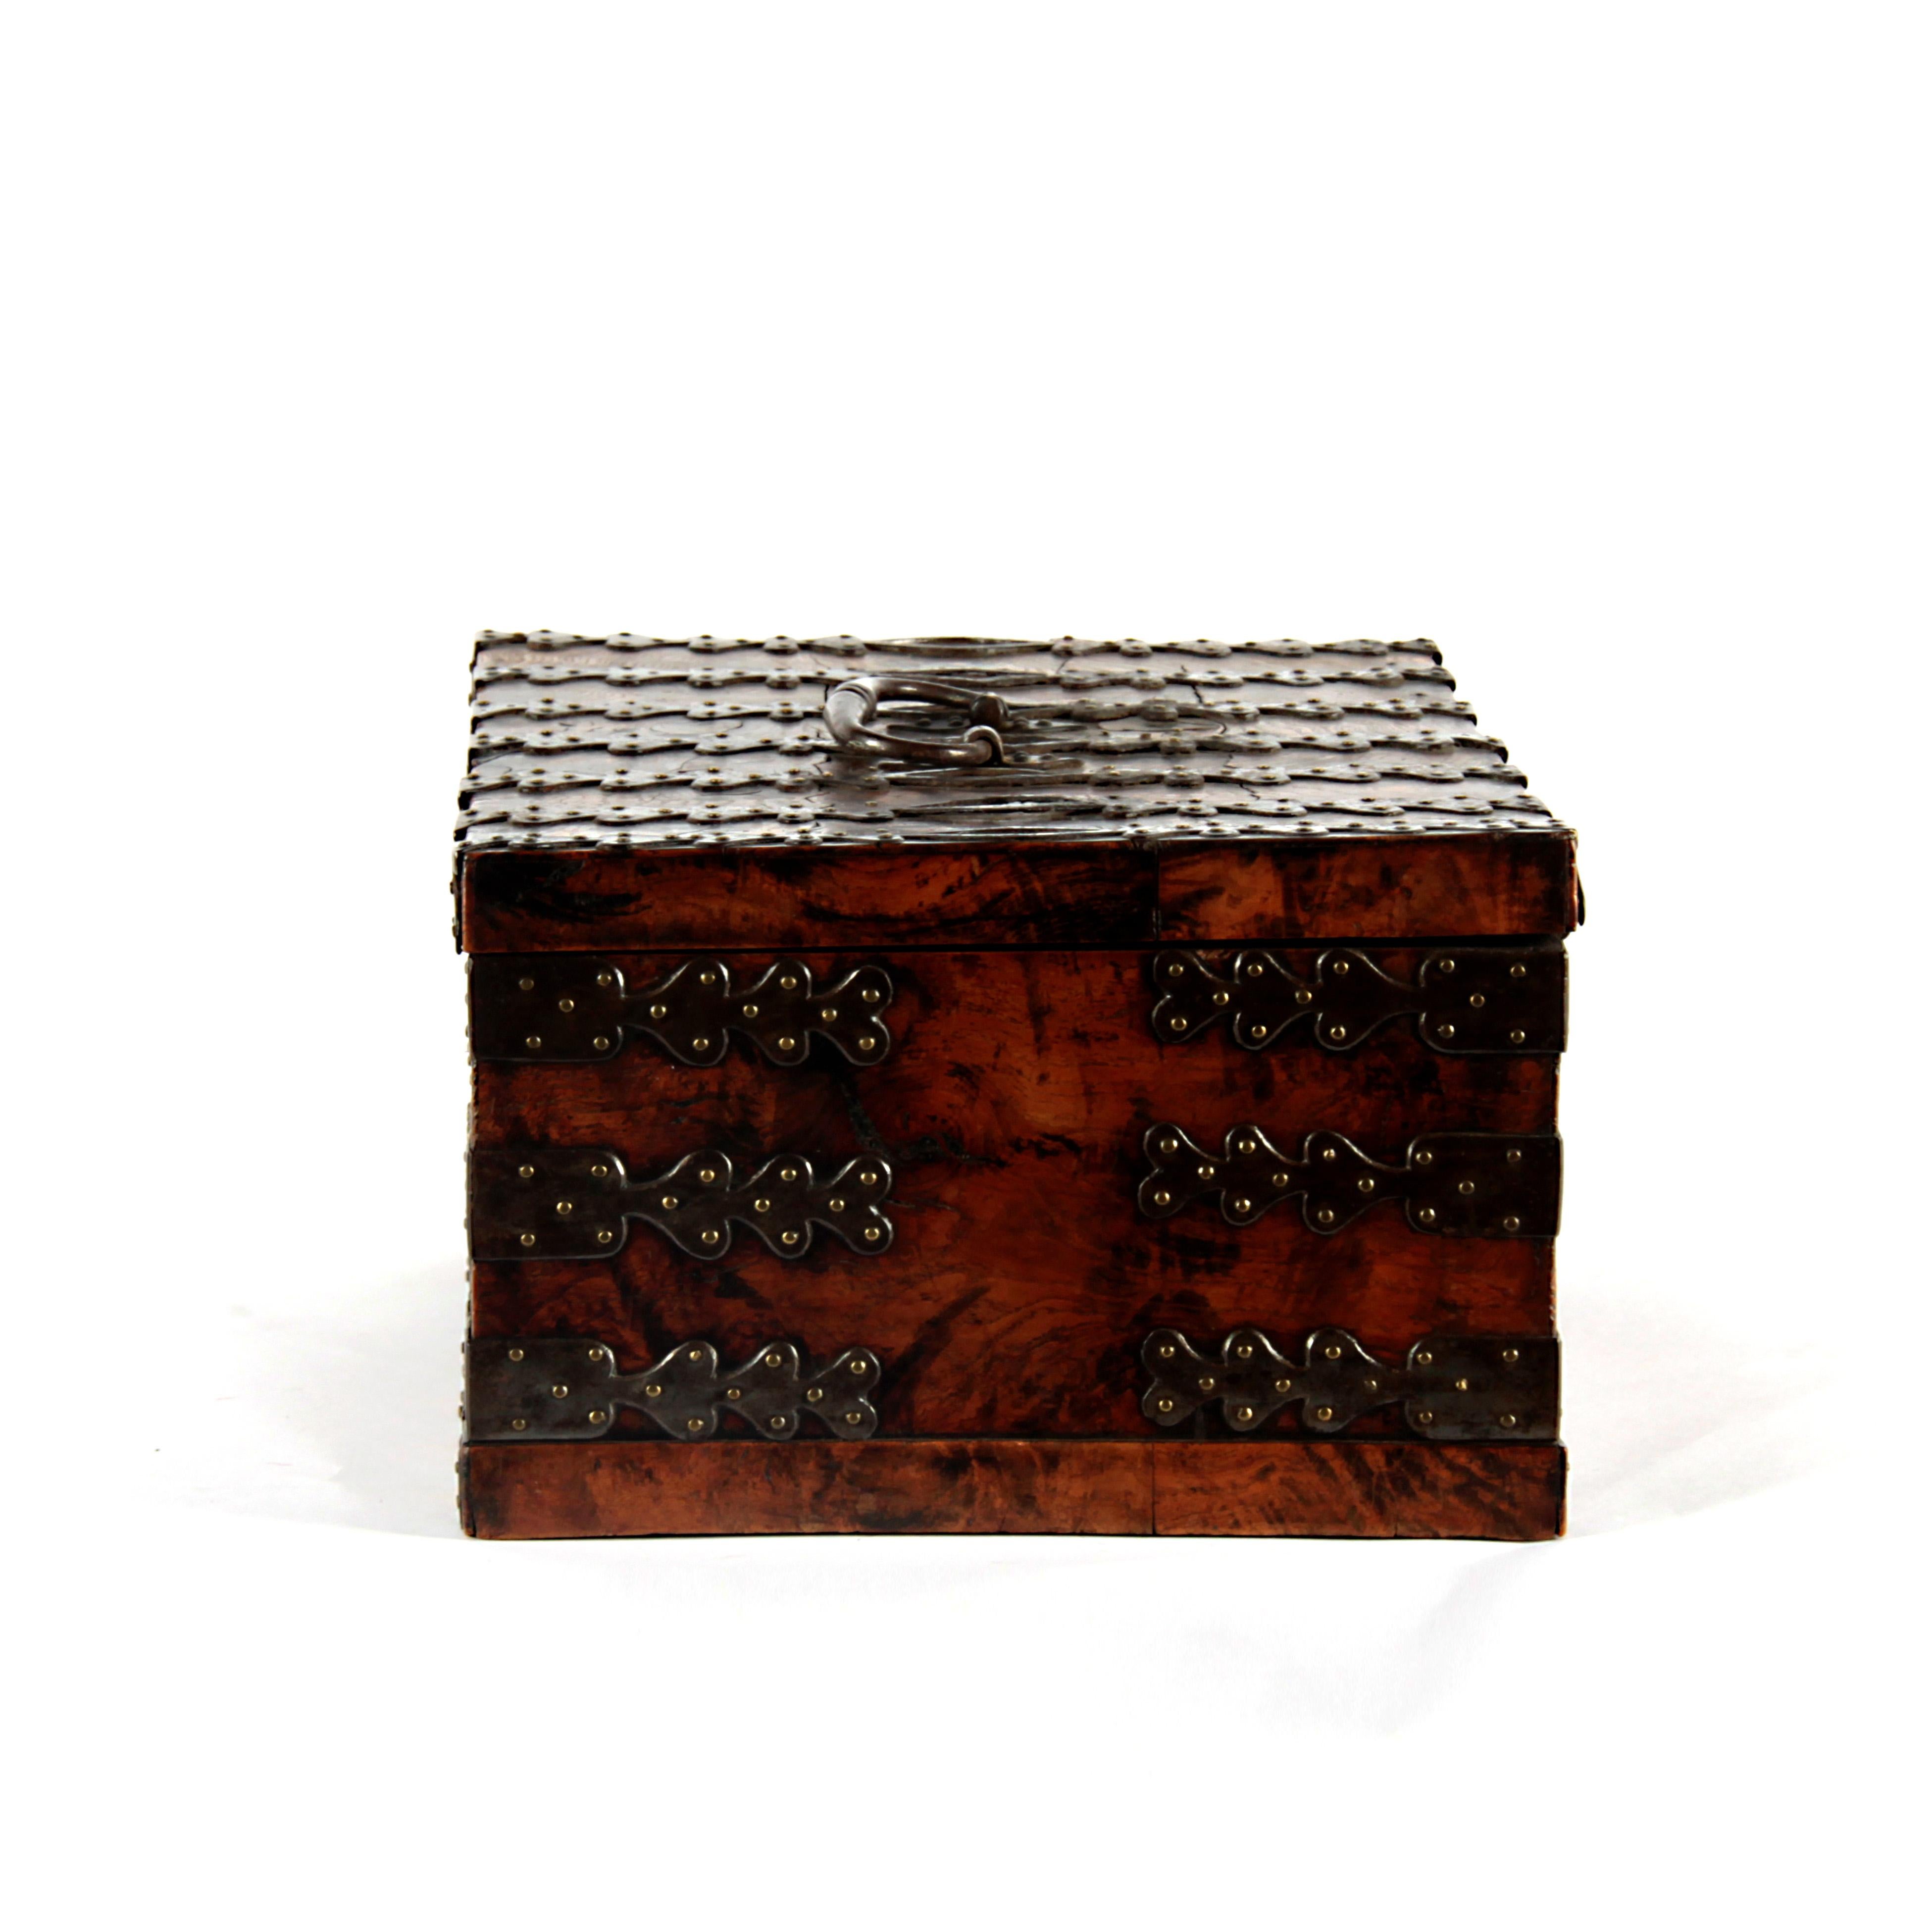 Sea Captain's Box, circa 1680/1720 'Colonial' In Good Condition For Sale In Esbeek, NL